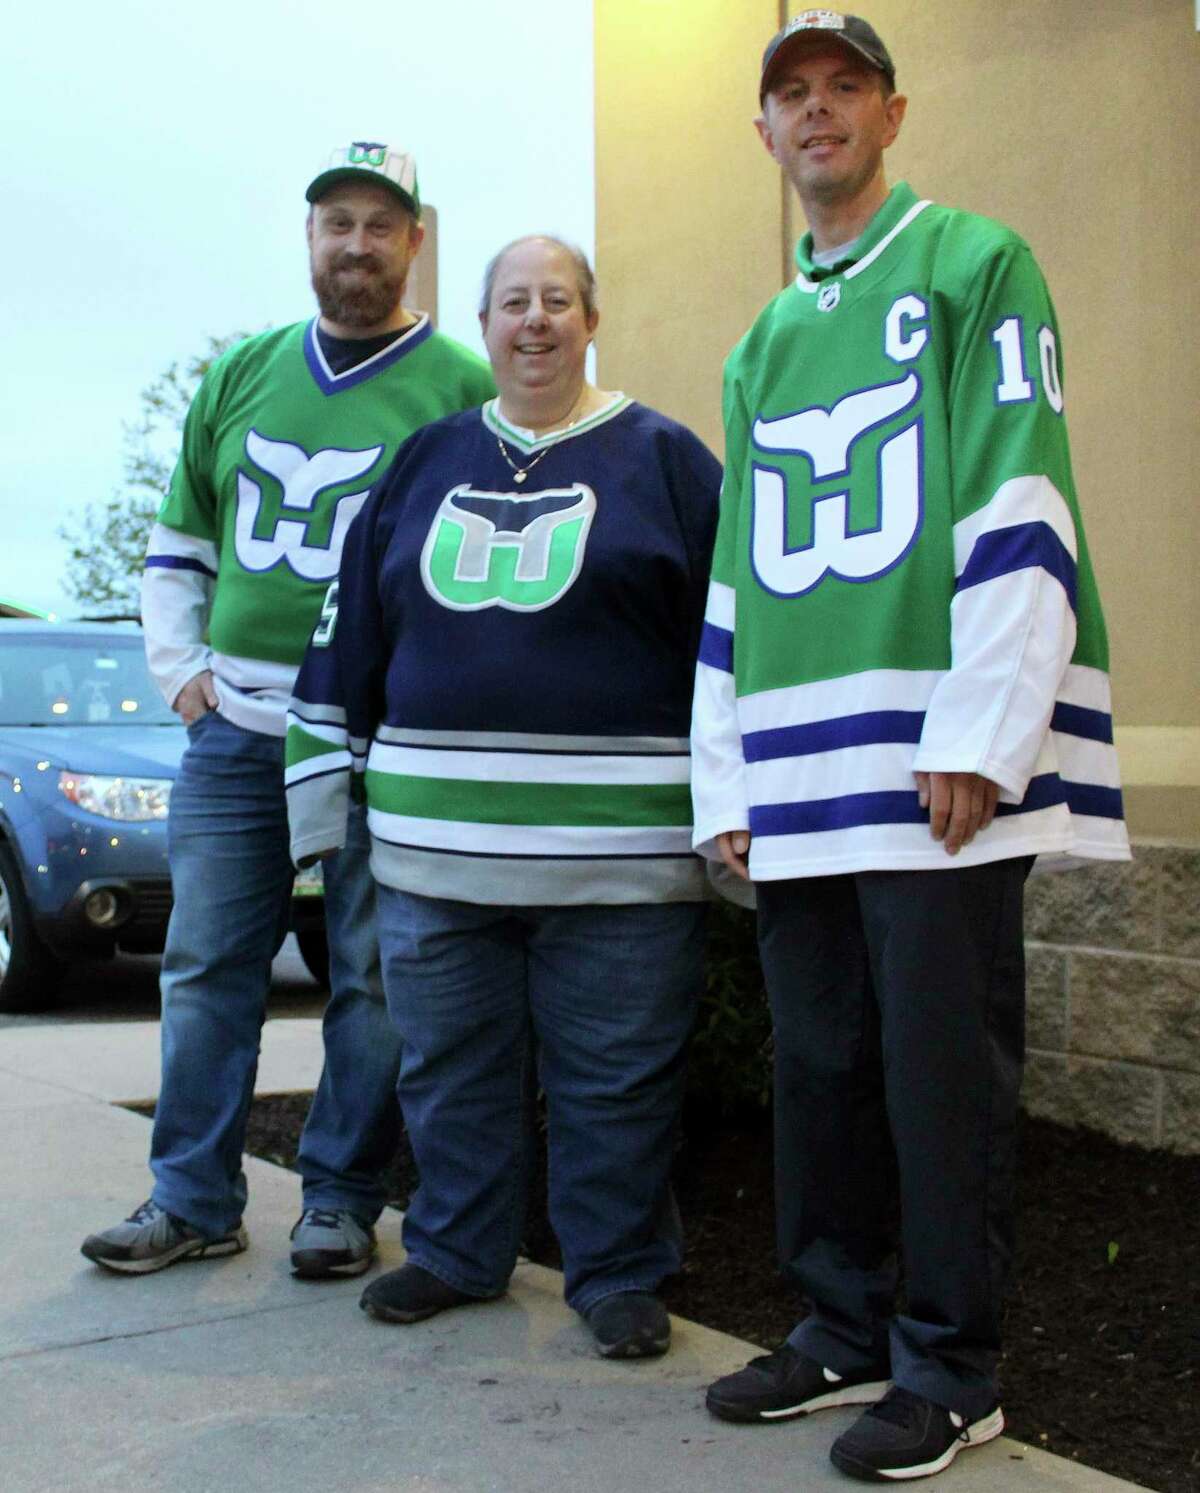 Hartford Whalers Booster Club members, from left, Scott St. Laurent, Joanne Coressa and Dan Narvesen pose outside a Manchester restaurant in 2019.